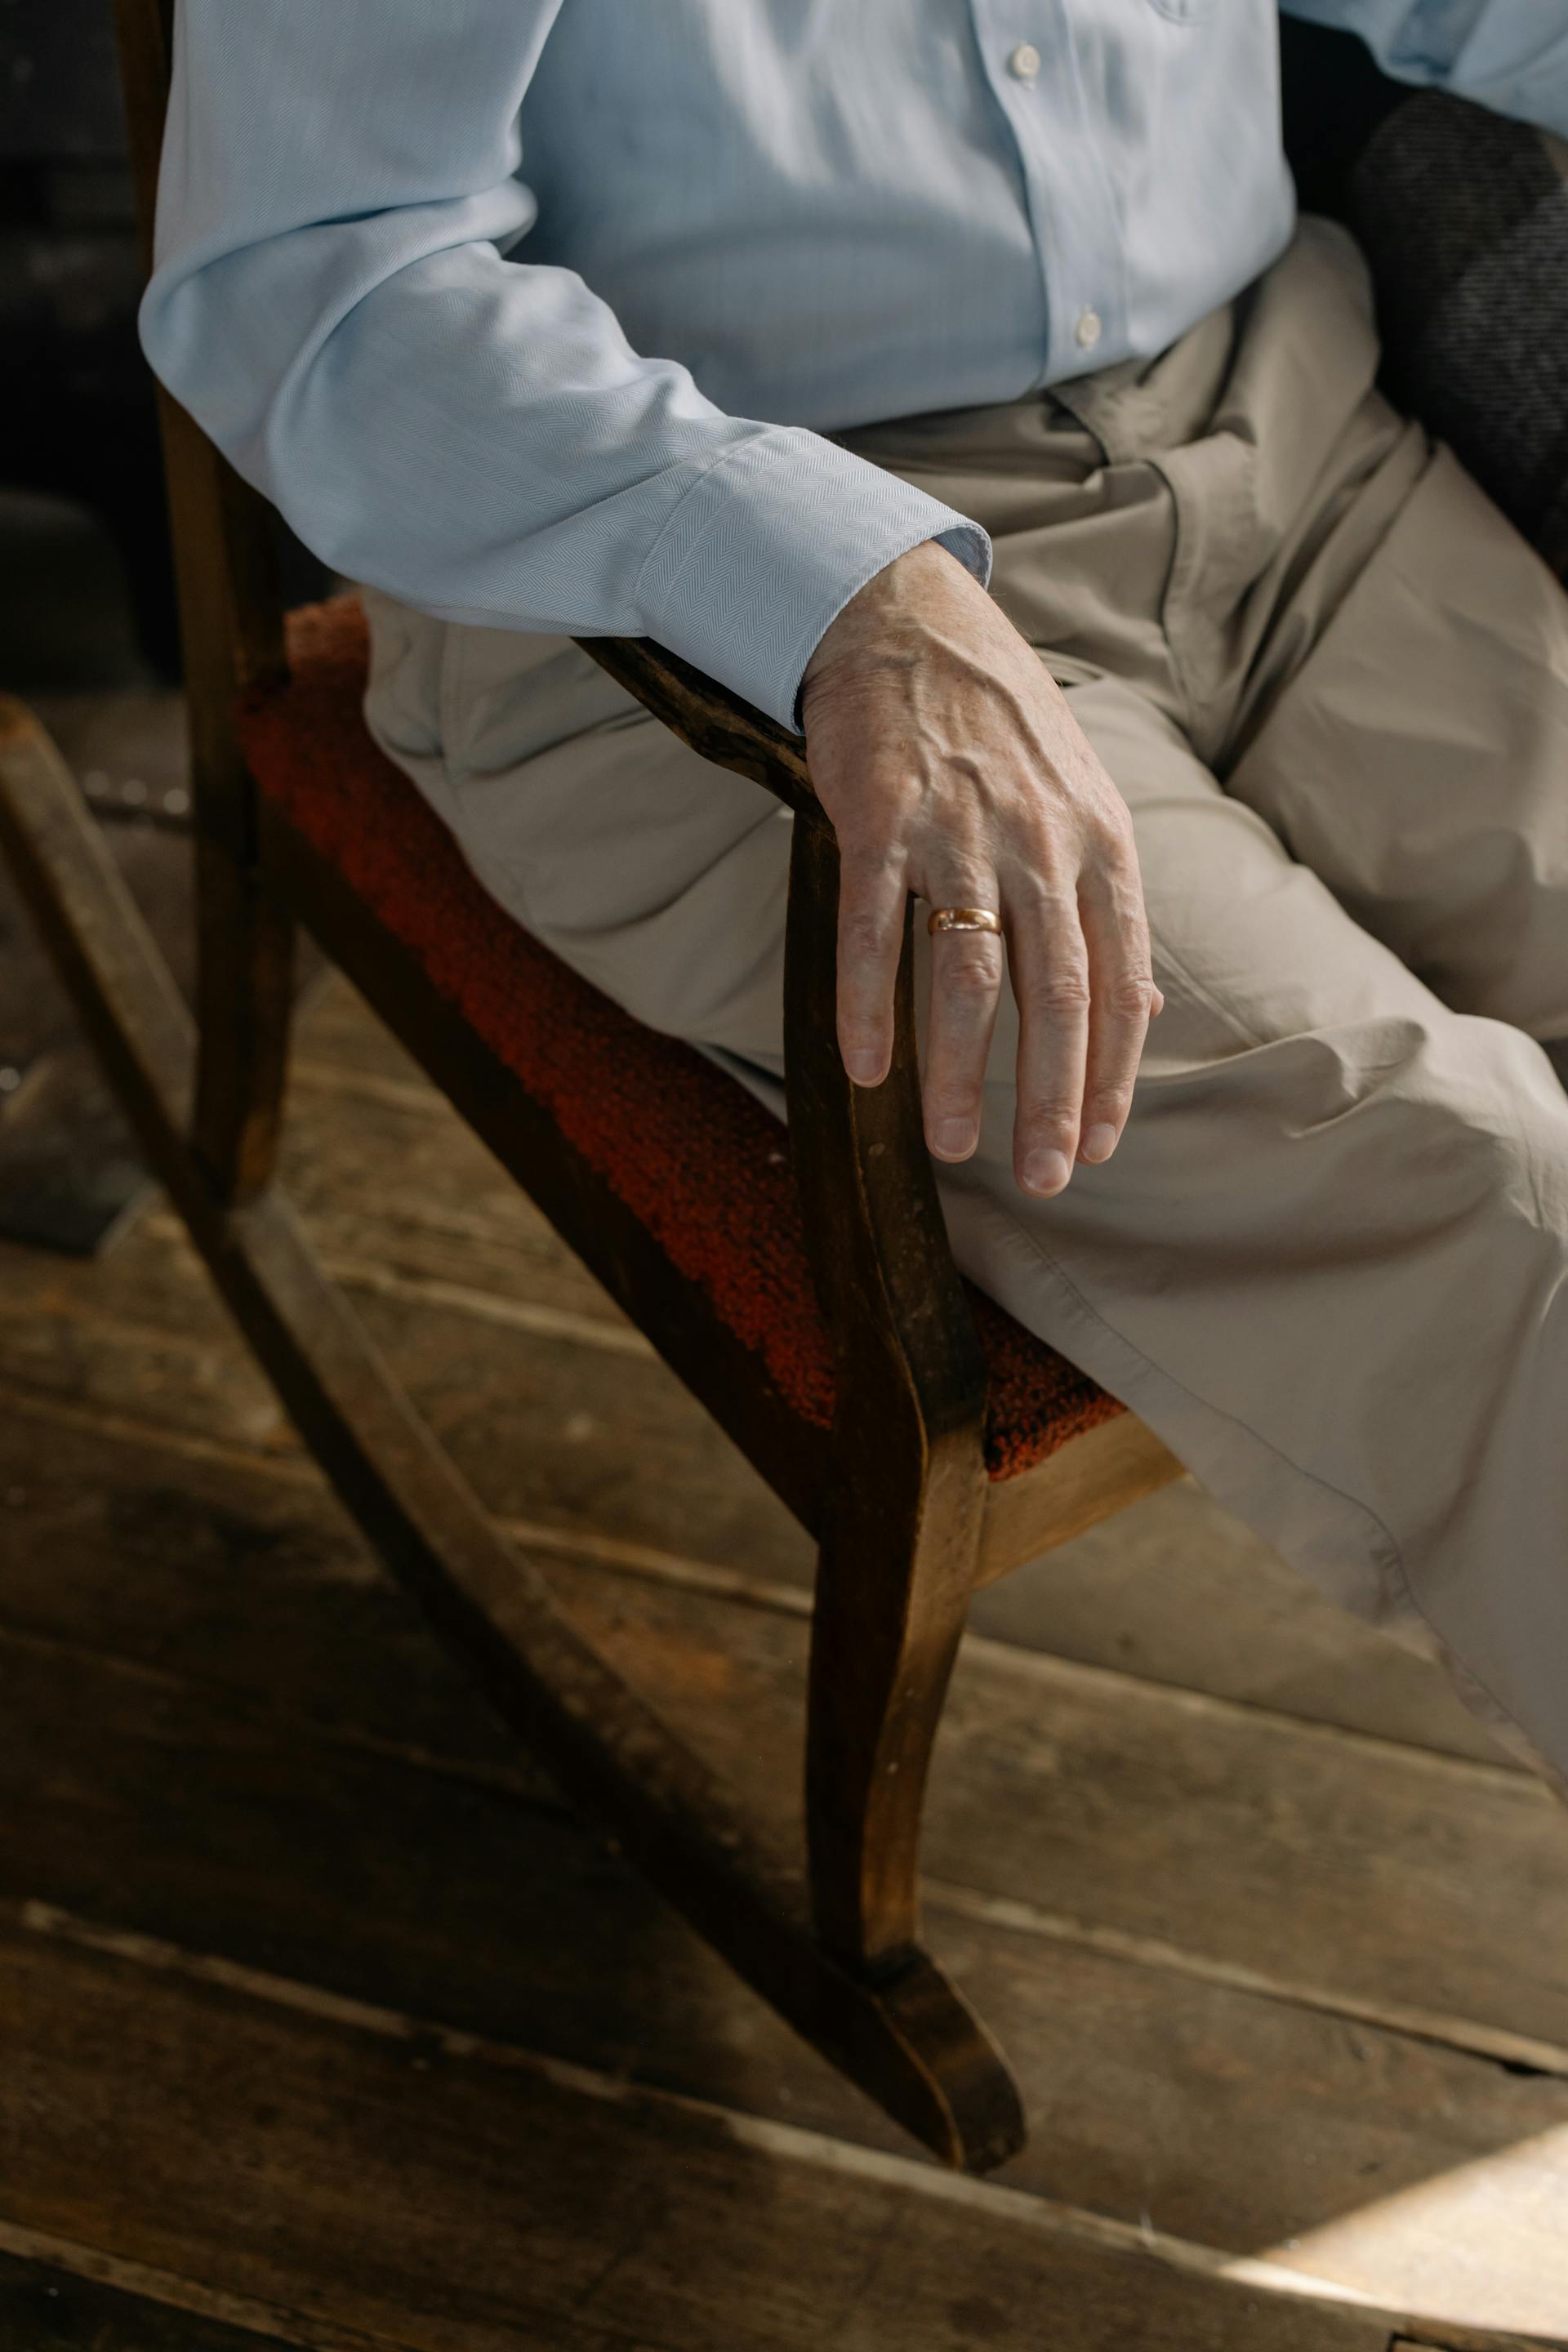 A close-up shot of a man sitting in an armchair wearing a wedding ring | Source: Pexels